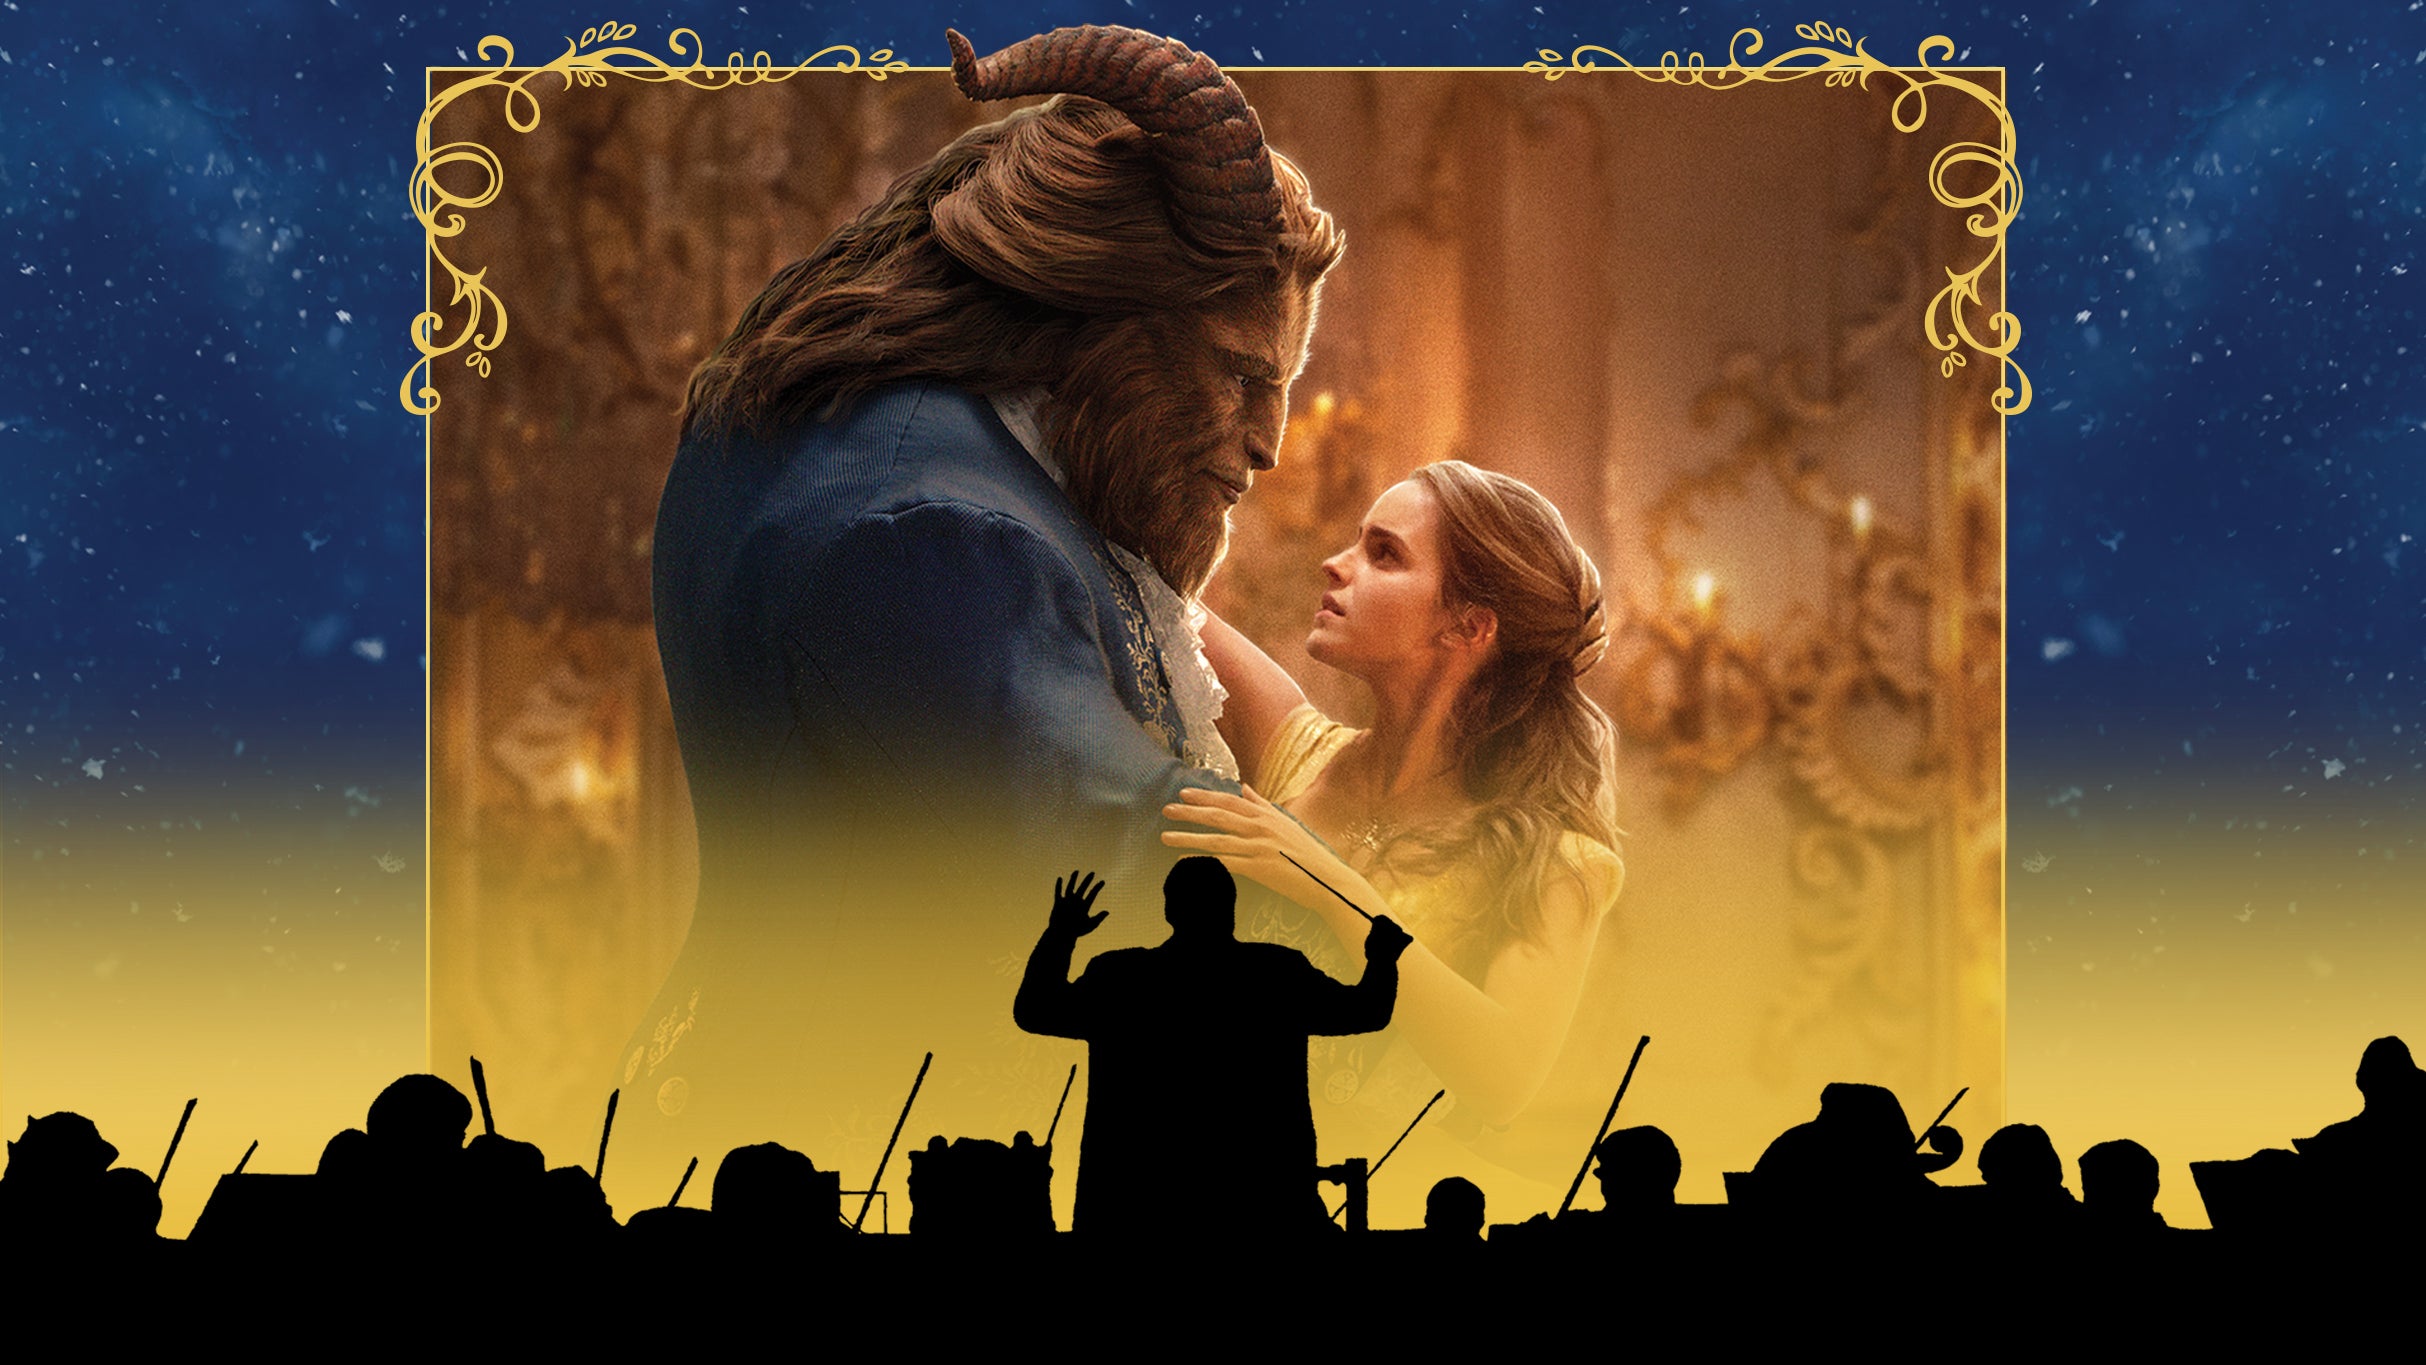 Beauty &amp; The Beast In Concert - Film With Live Orchestra &amp; Singers presale information on freepresalepasswords.com